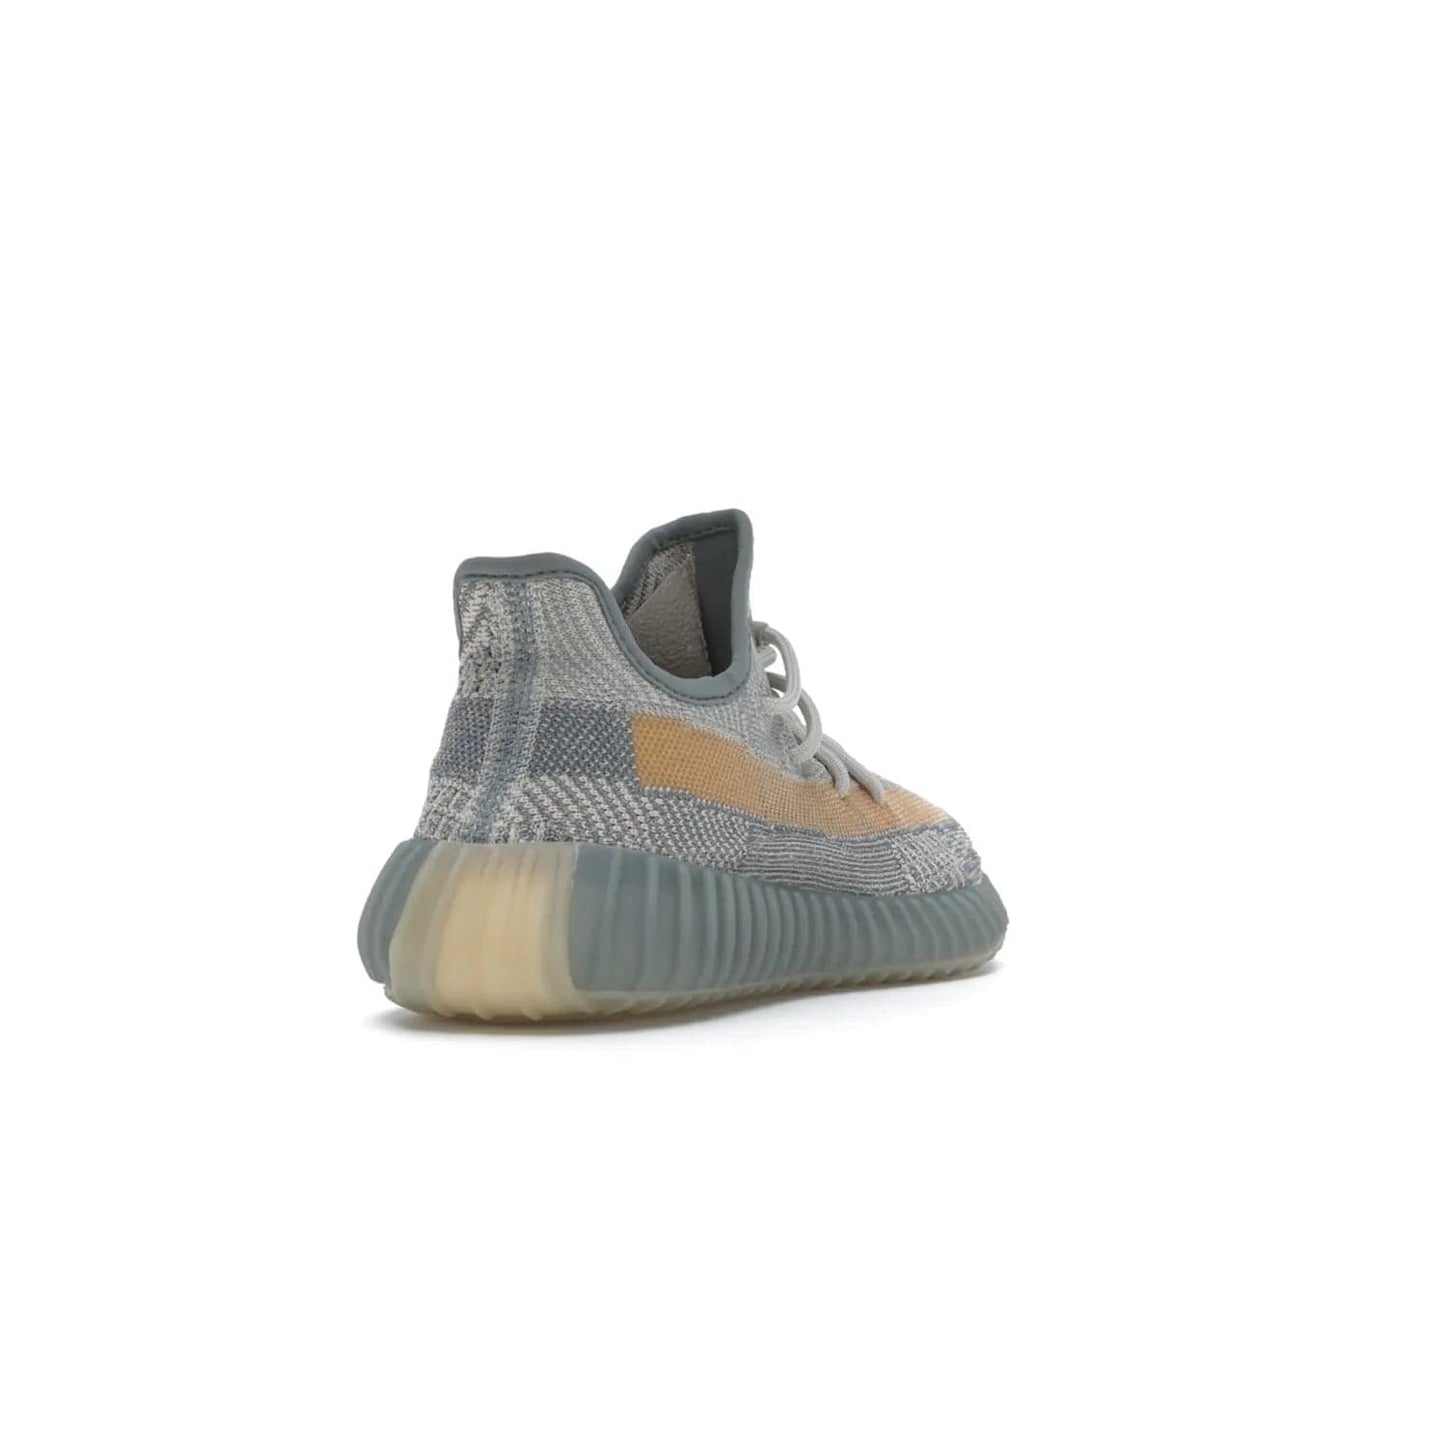 adidas Yeezy Boost 350 V2 Israfil - Image 31 - Only at www.BallersClubKickz.com - The adidas Yeezy Boost 350 V2 Israfil provides a unique style with a triple colorway and multi-colored threads. Featuring BOOST cushioning in a translucent midsole, this must-have sneaker drops in August 2020.